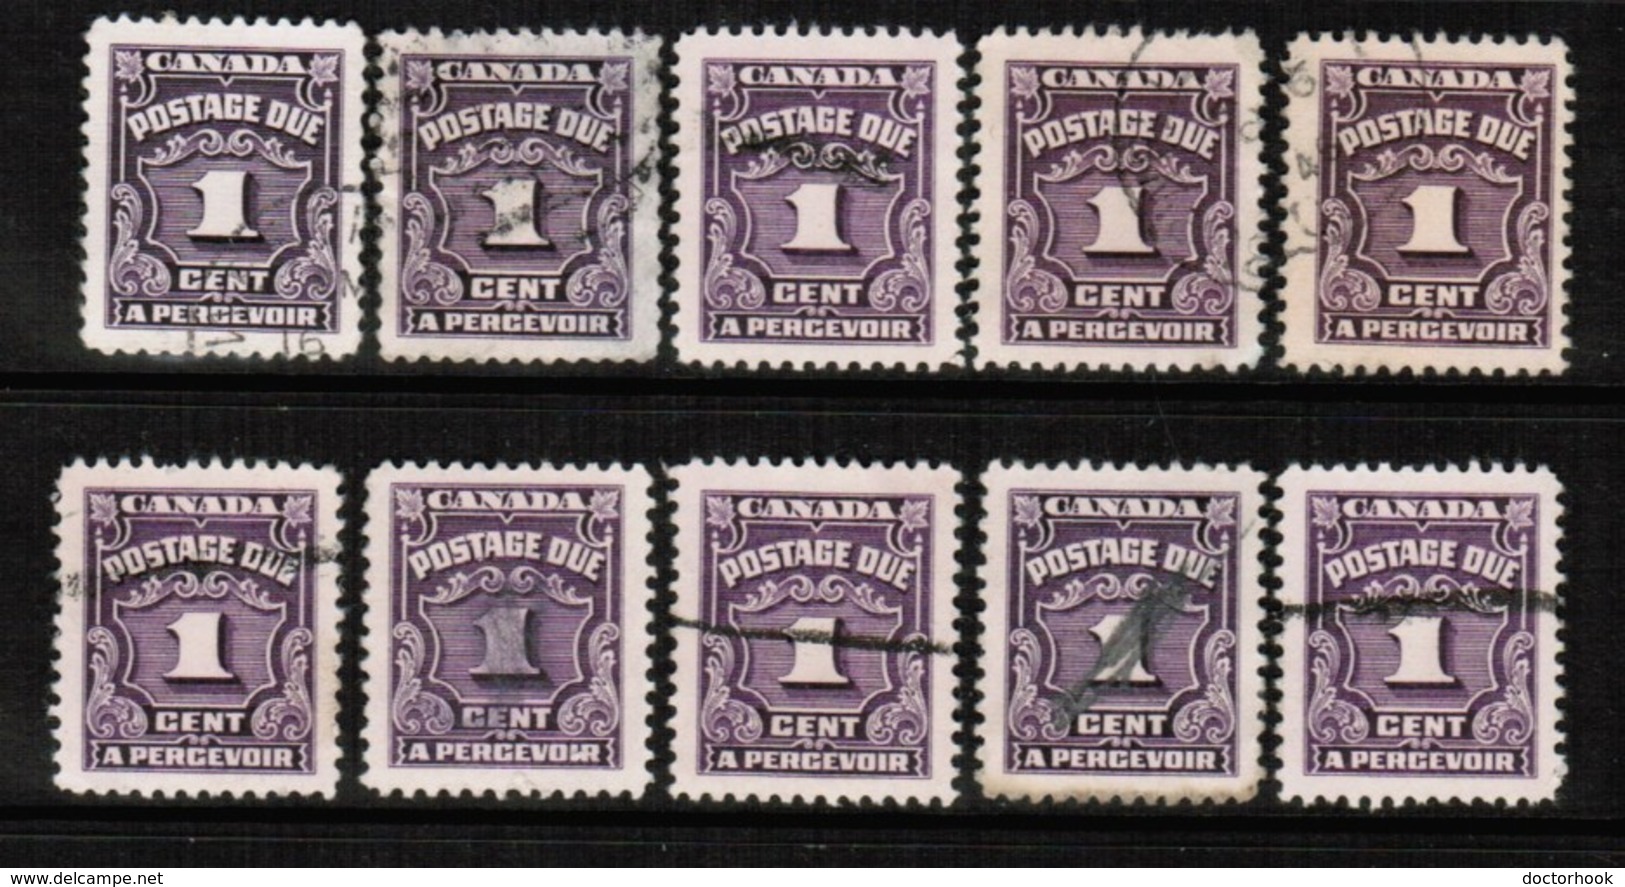 CANADA  Scott # J 15 USED WHOLESALE LOT OF 10 (WH-370) - Postage Due